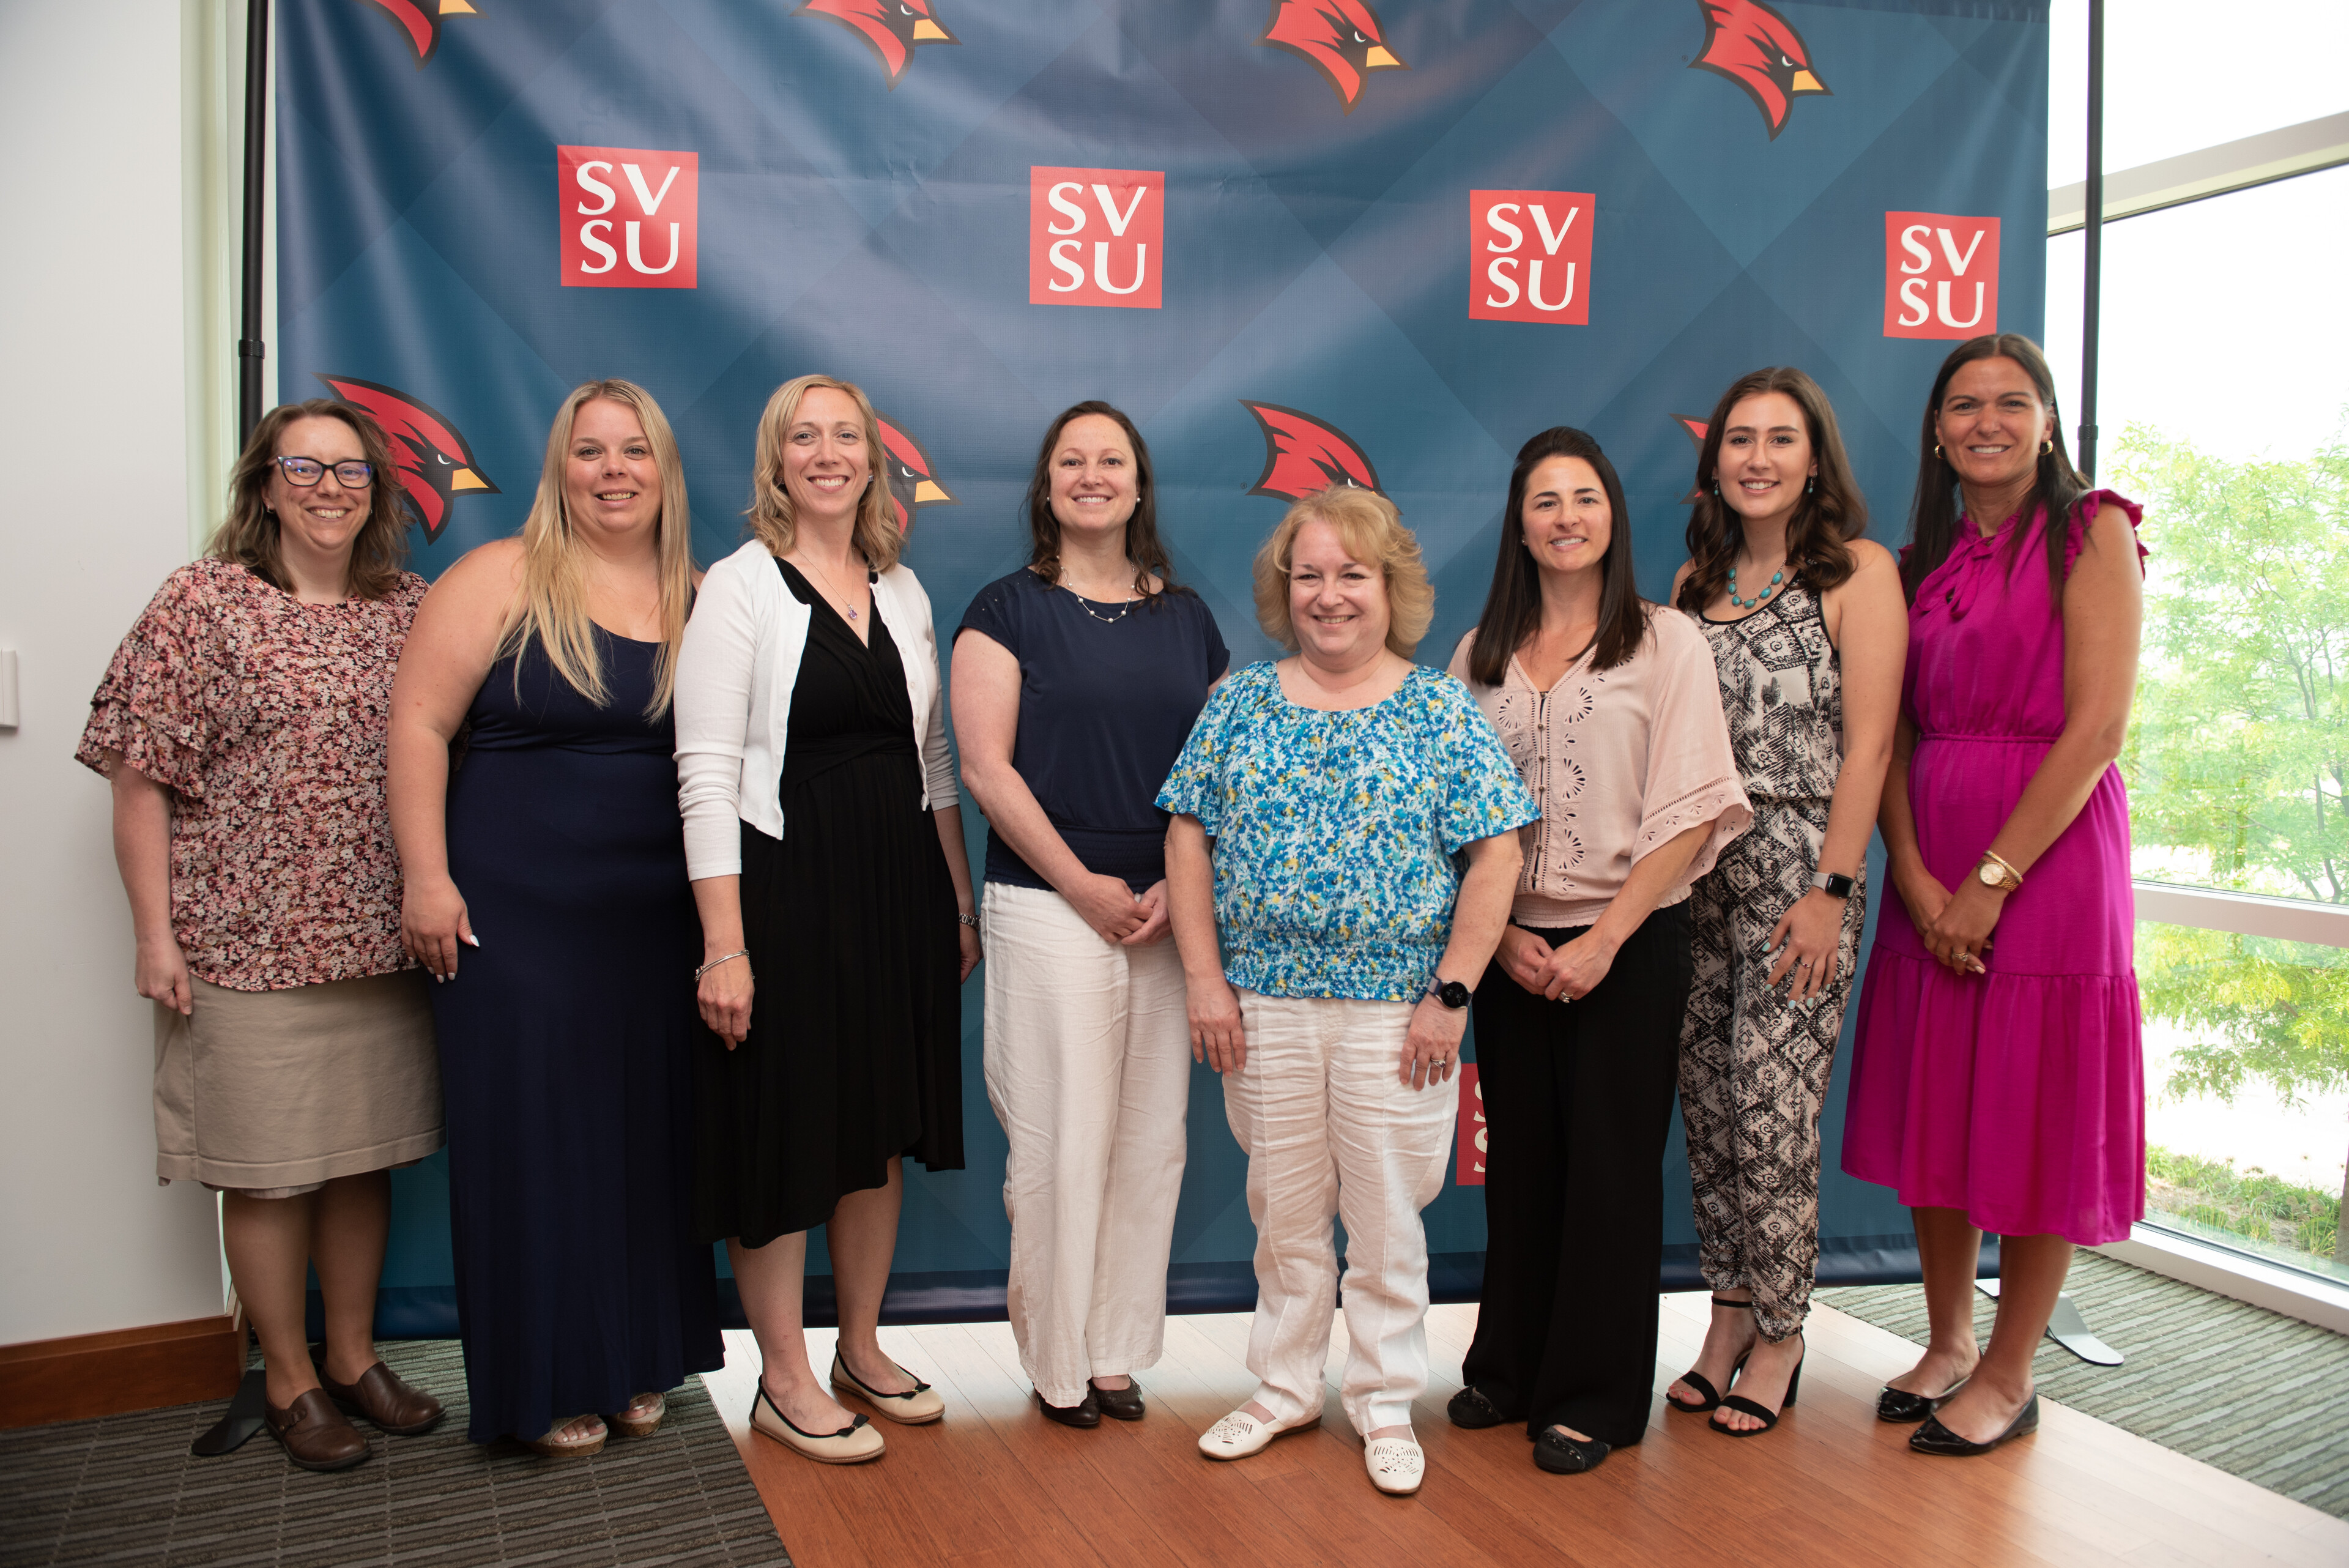 Group of women standing in front of SVSU backdrop